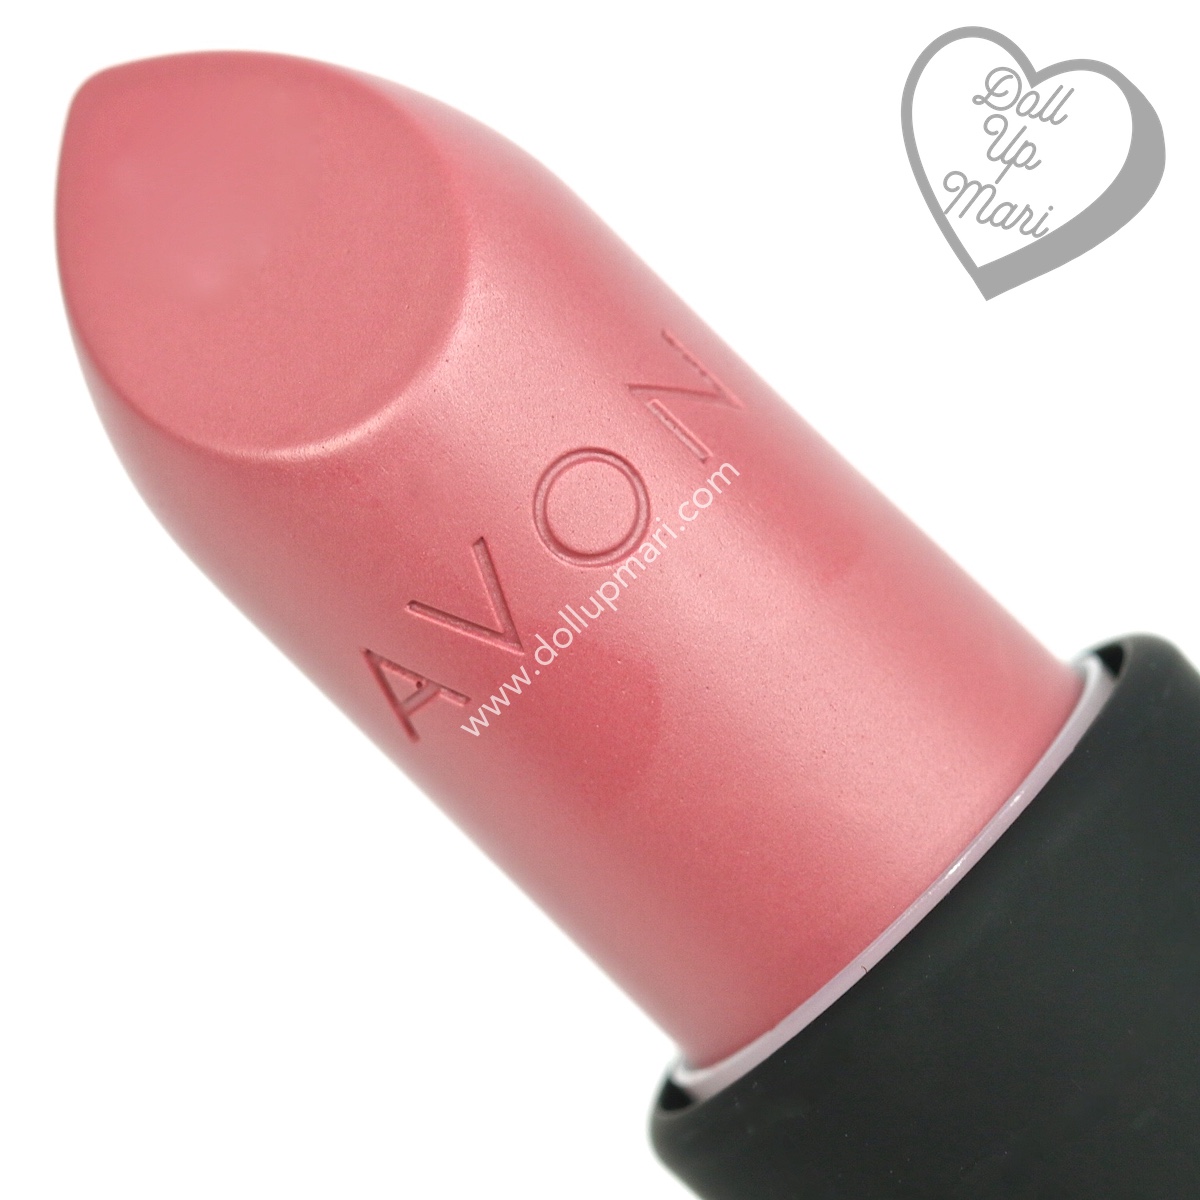 zoom in of Pink Truffle shade of AVON Perfectly Matte Lipstick